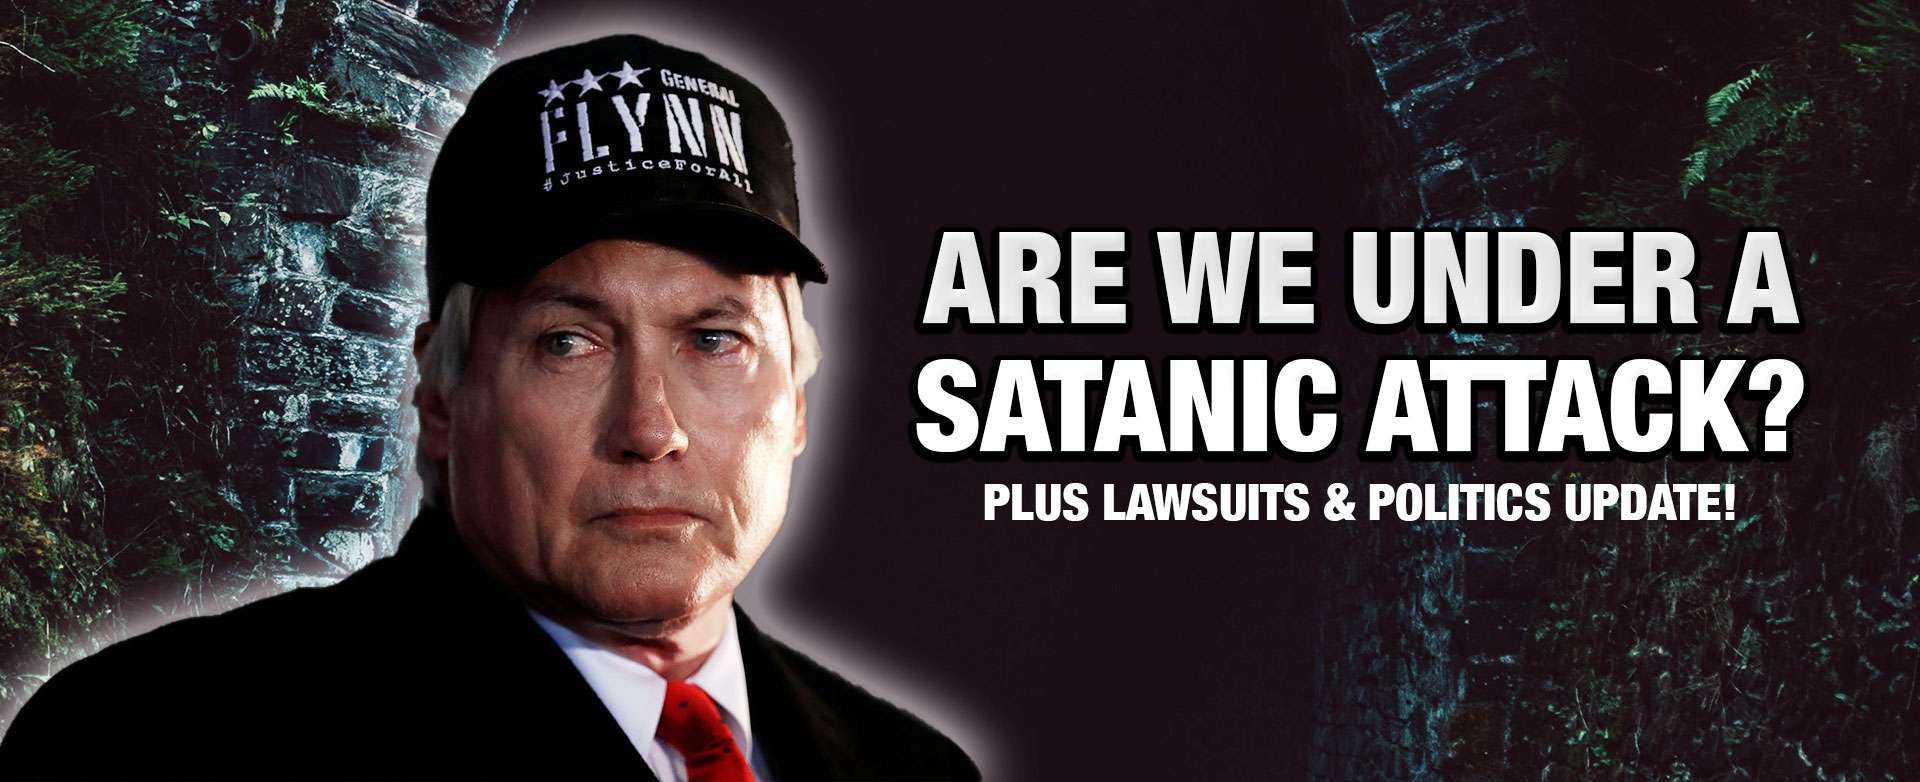 MyPatriotsNetwork-Lin Wood Answers: Are We Under a Satanic Attack? Plus Lawsuits & Politics Update!